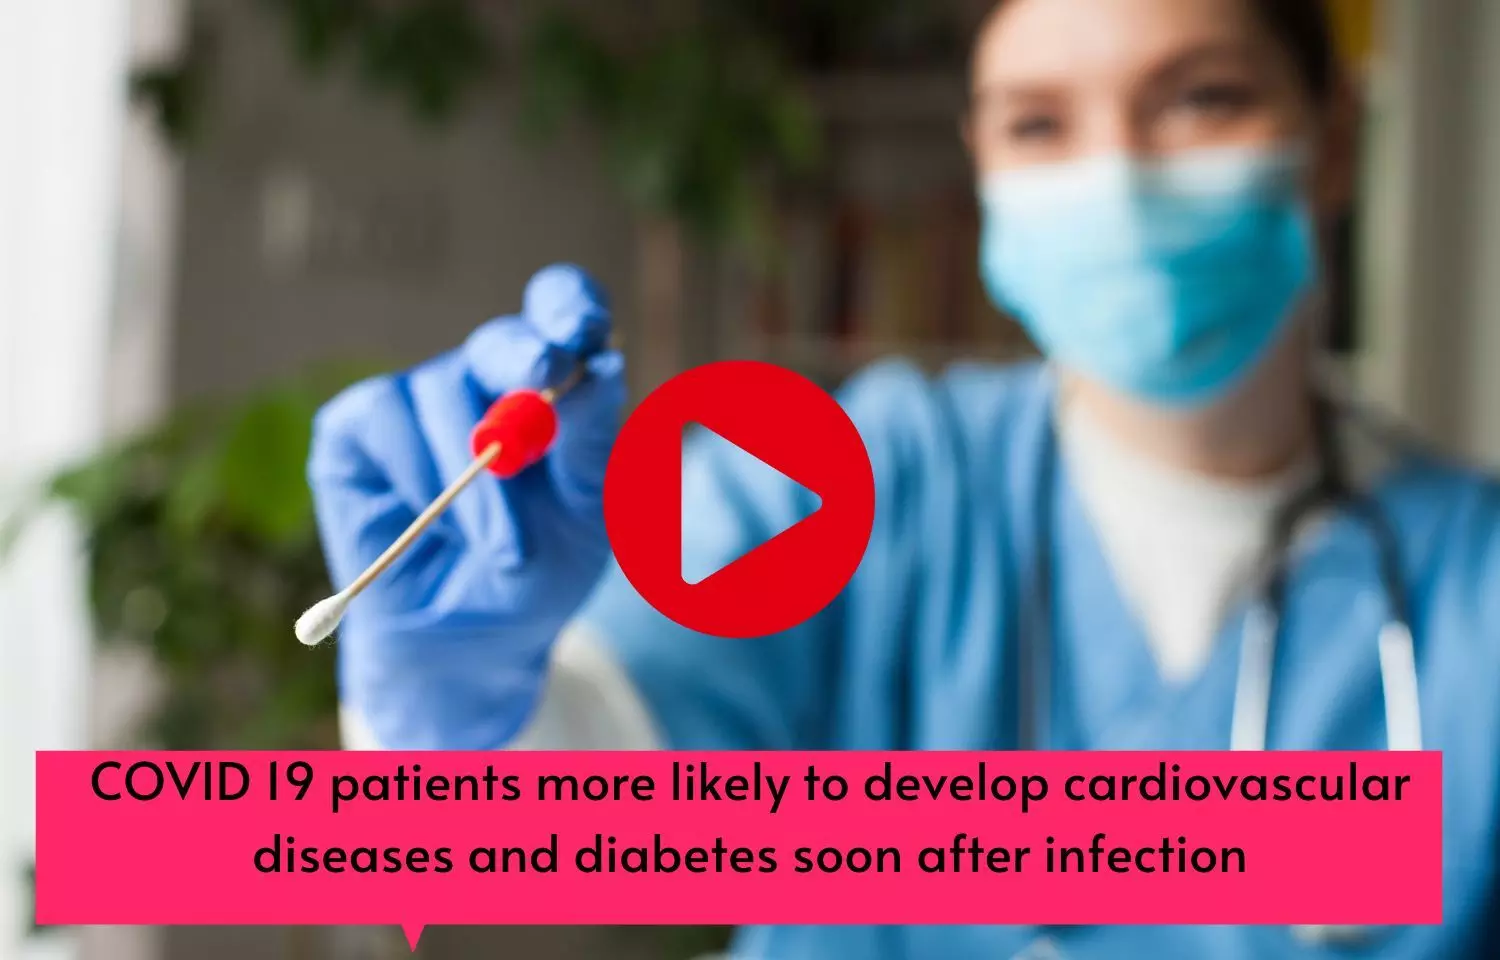 COVID 19 patients more likely to develop cardiovascular diseases and diabetes soon after infection